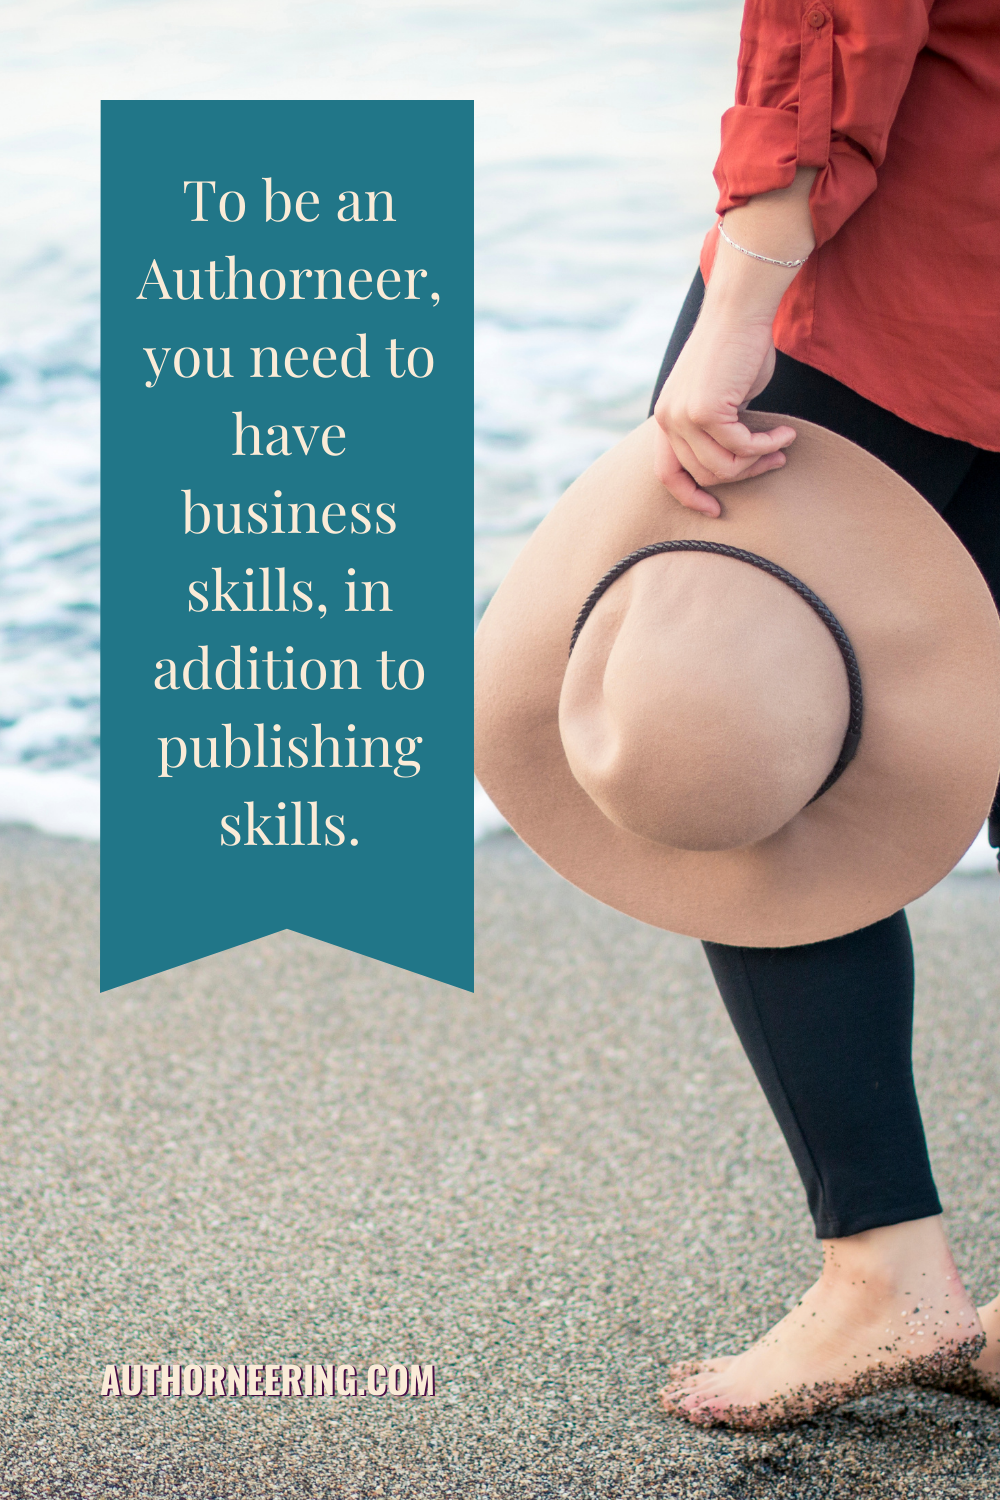 To be an Authorneer's, you need to have business skills, in addition to publishing skills.